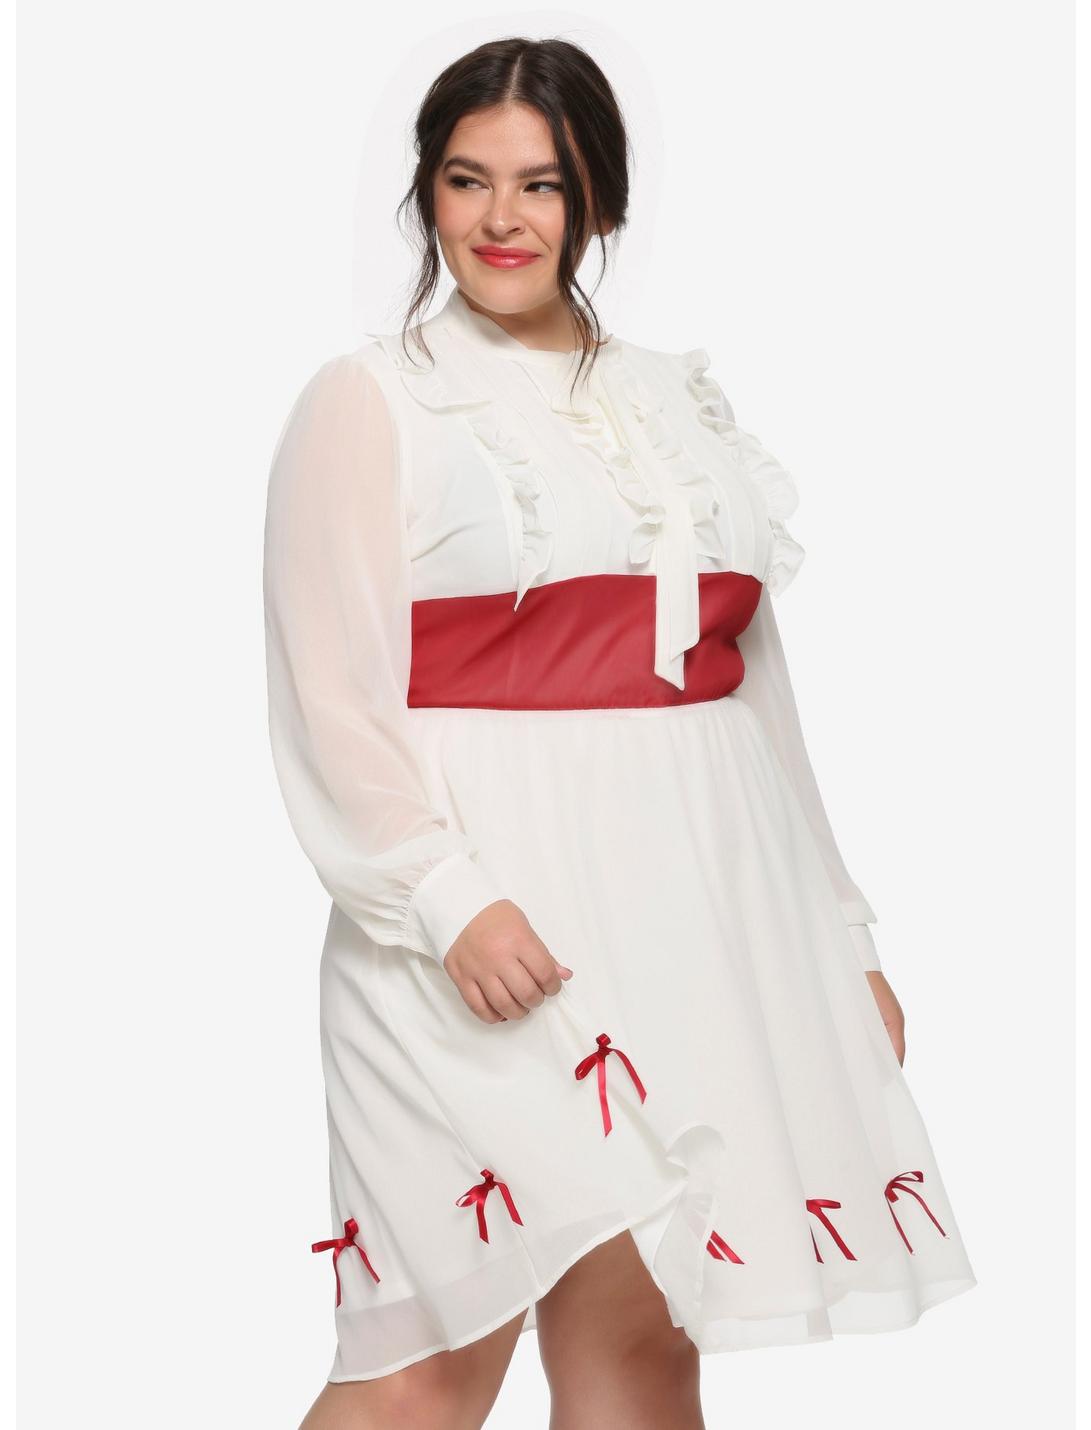 Her Universe Disney Mary Poppins Classic Chiffon Dress Plus Size, WHITE, hi-res